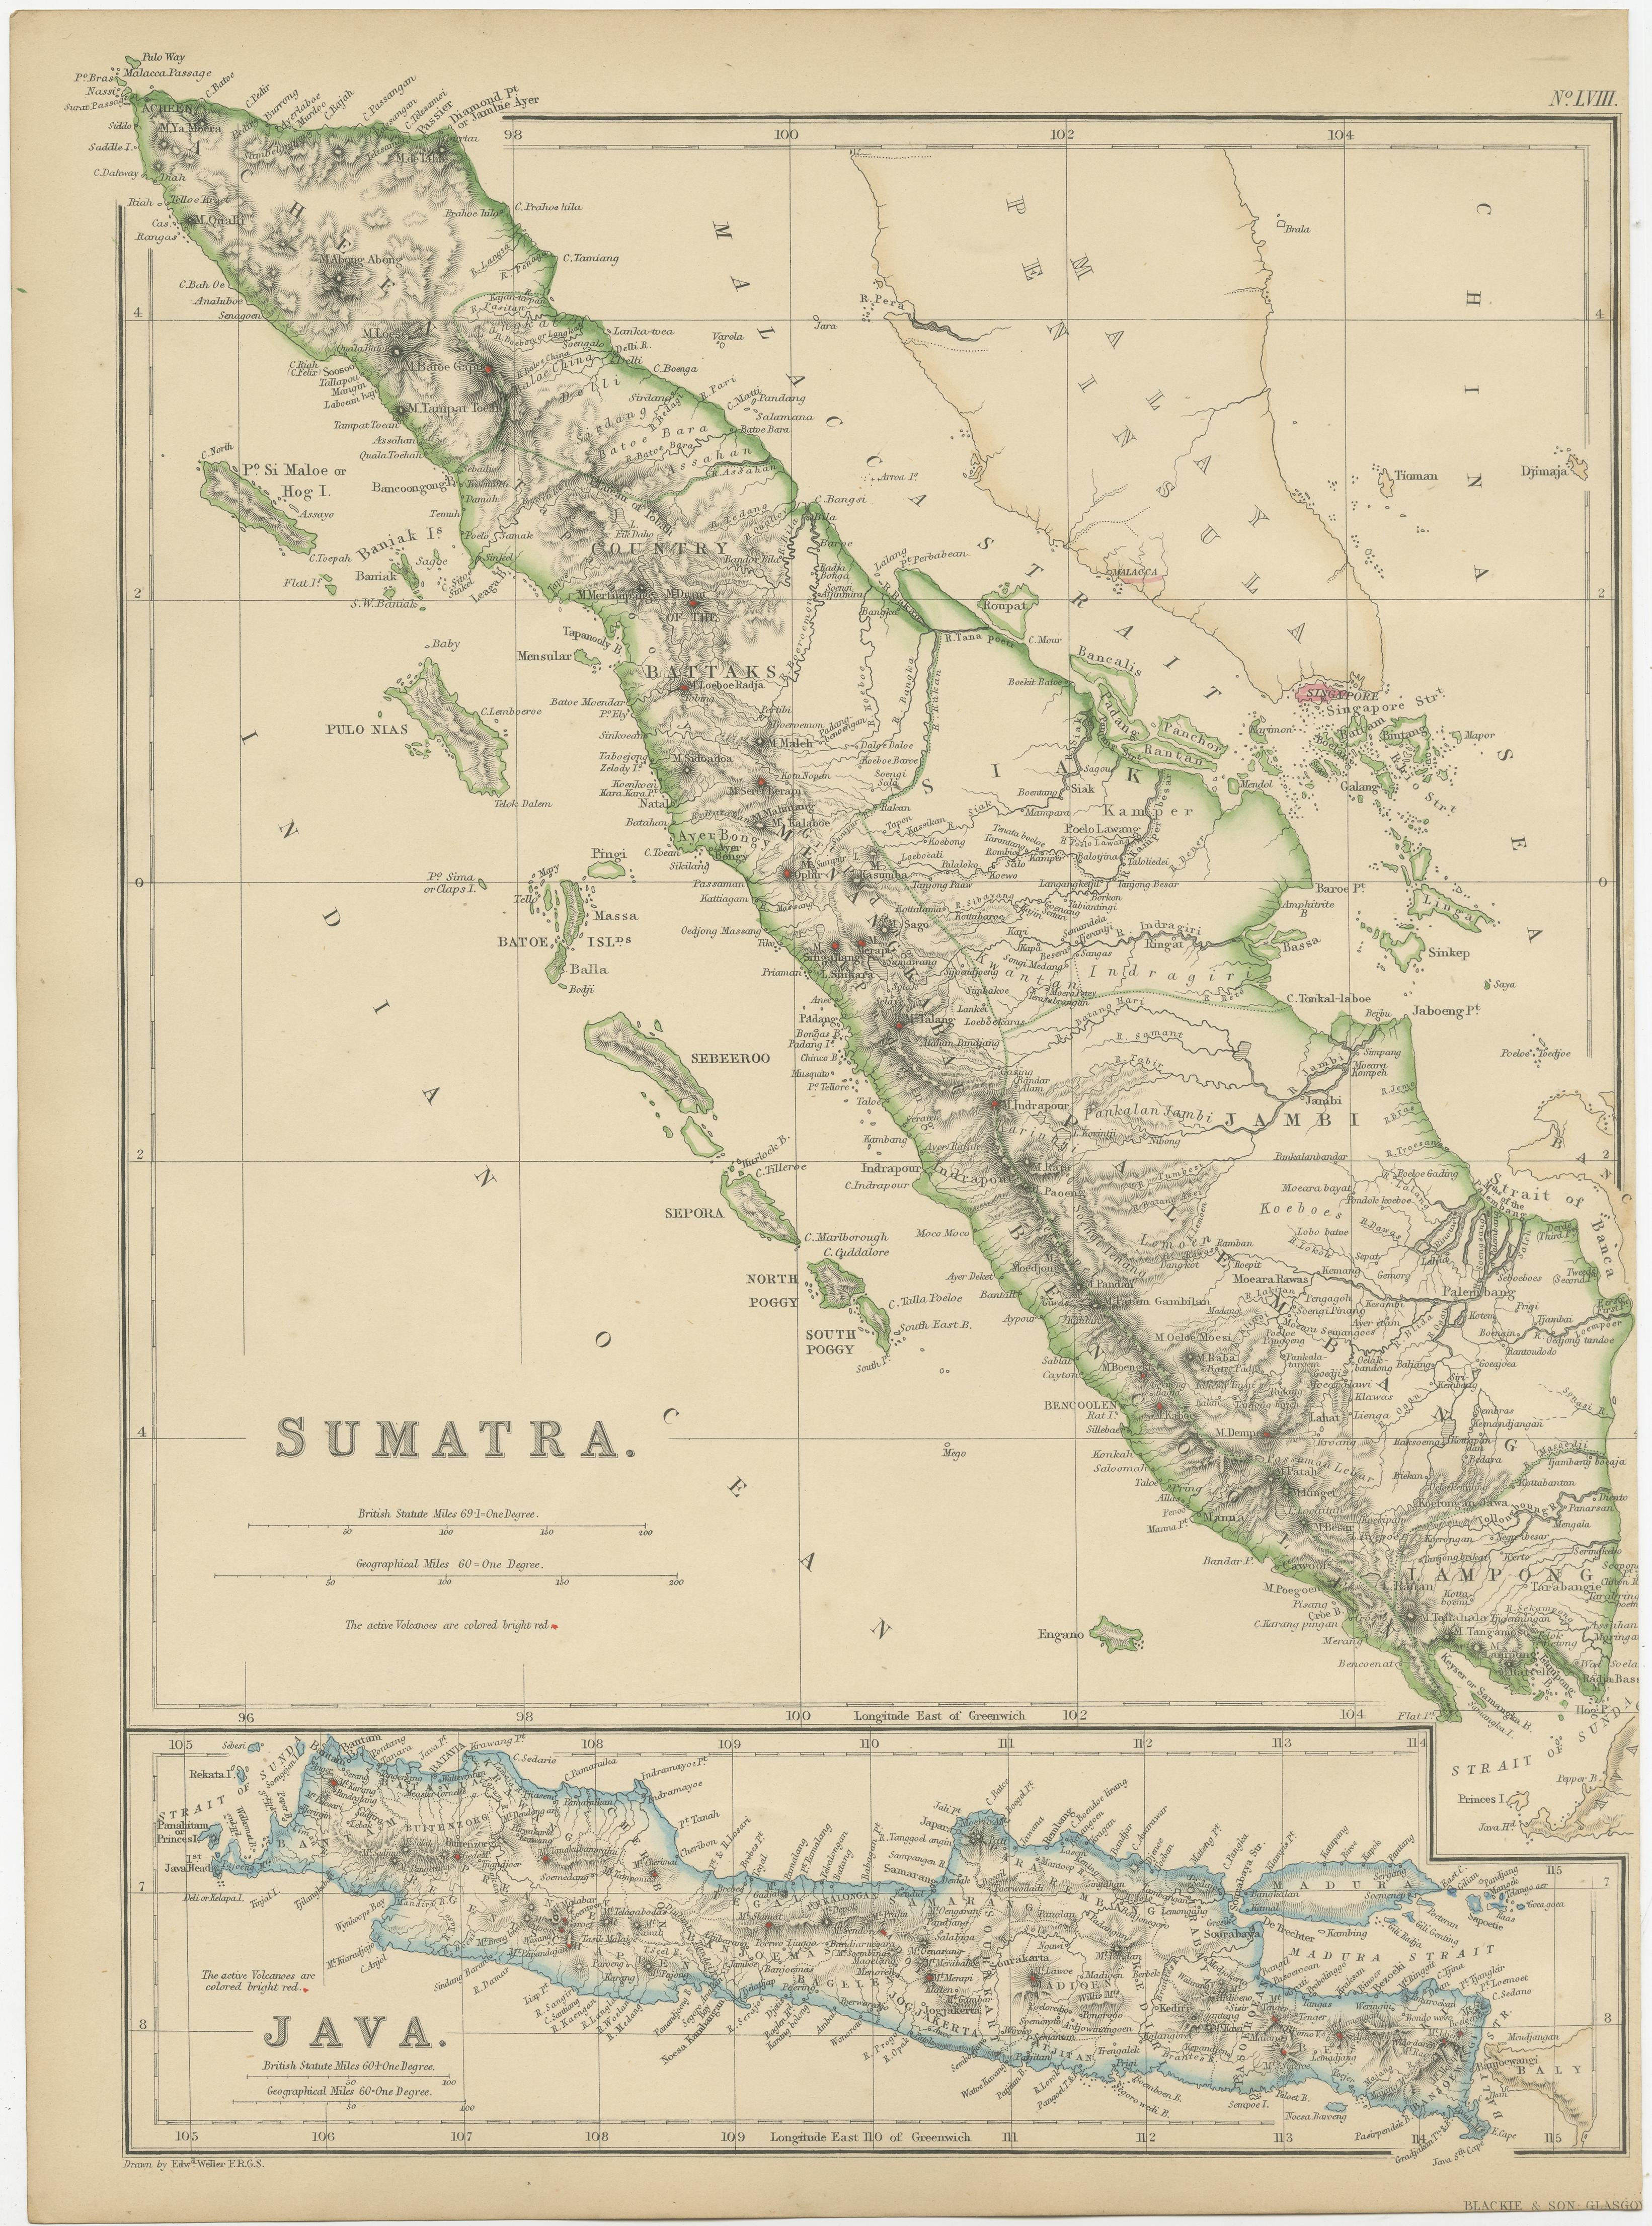 Antique map titled 'Sumatra'. Original antique map of Sumatra with inset map of Java. This map originates from ‘The Imperial Atlas of Modern Geography’. Published by W. G. Blackie, 1859.